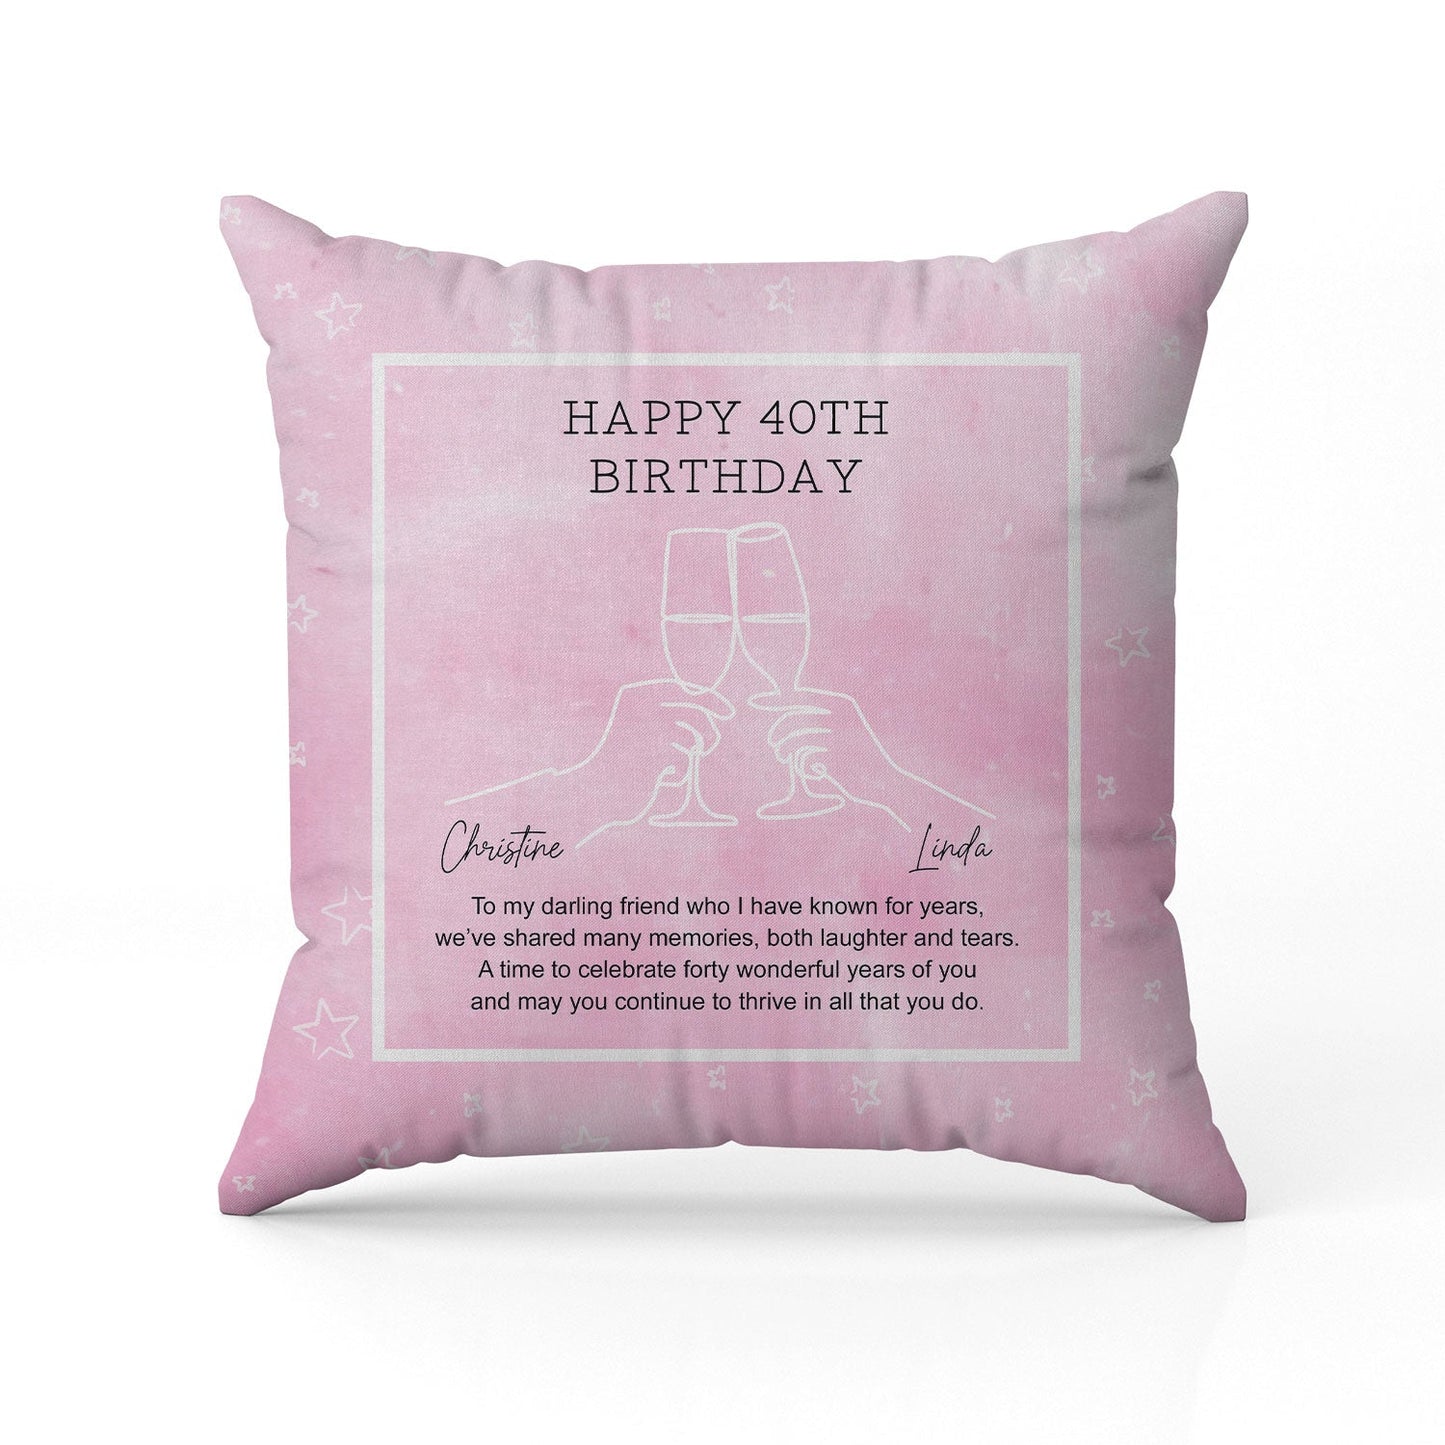 Happy 40th Birthday - Personalized 40th Birthday gift For Old Friend - Custom Pillow - MyMindfulGifts